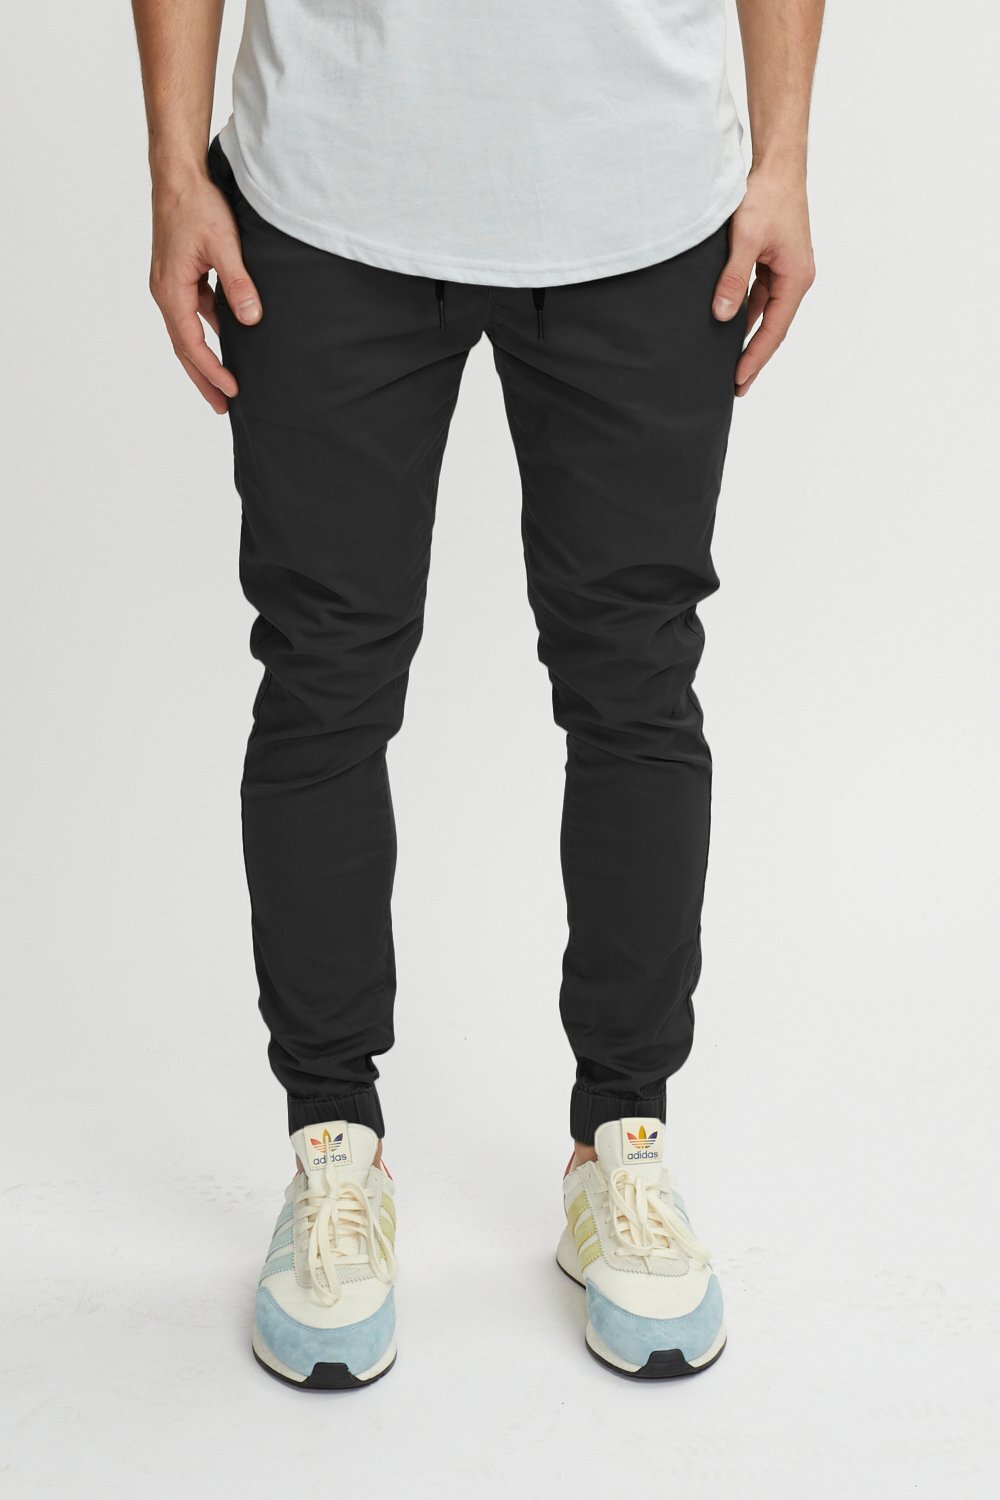 pedaal Adolescent Megalopolis Chino Jogger 2.0 in black by Kuwalla Tee — Olive + Iron